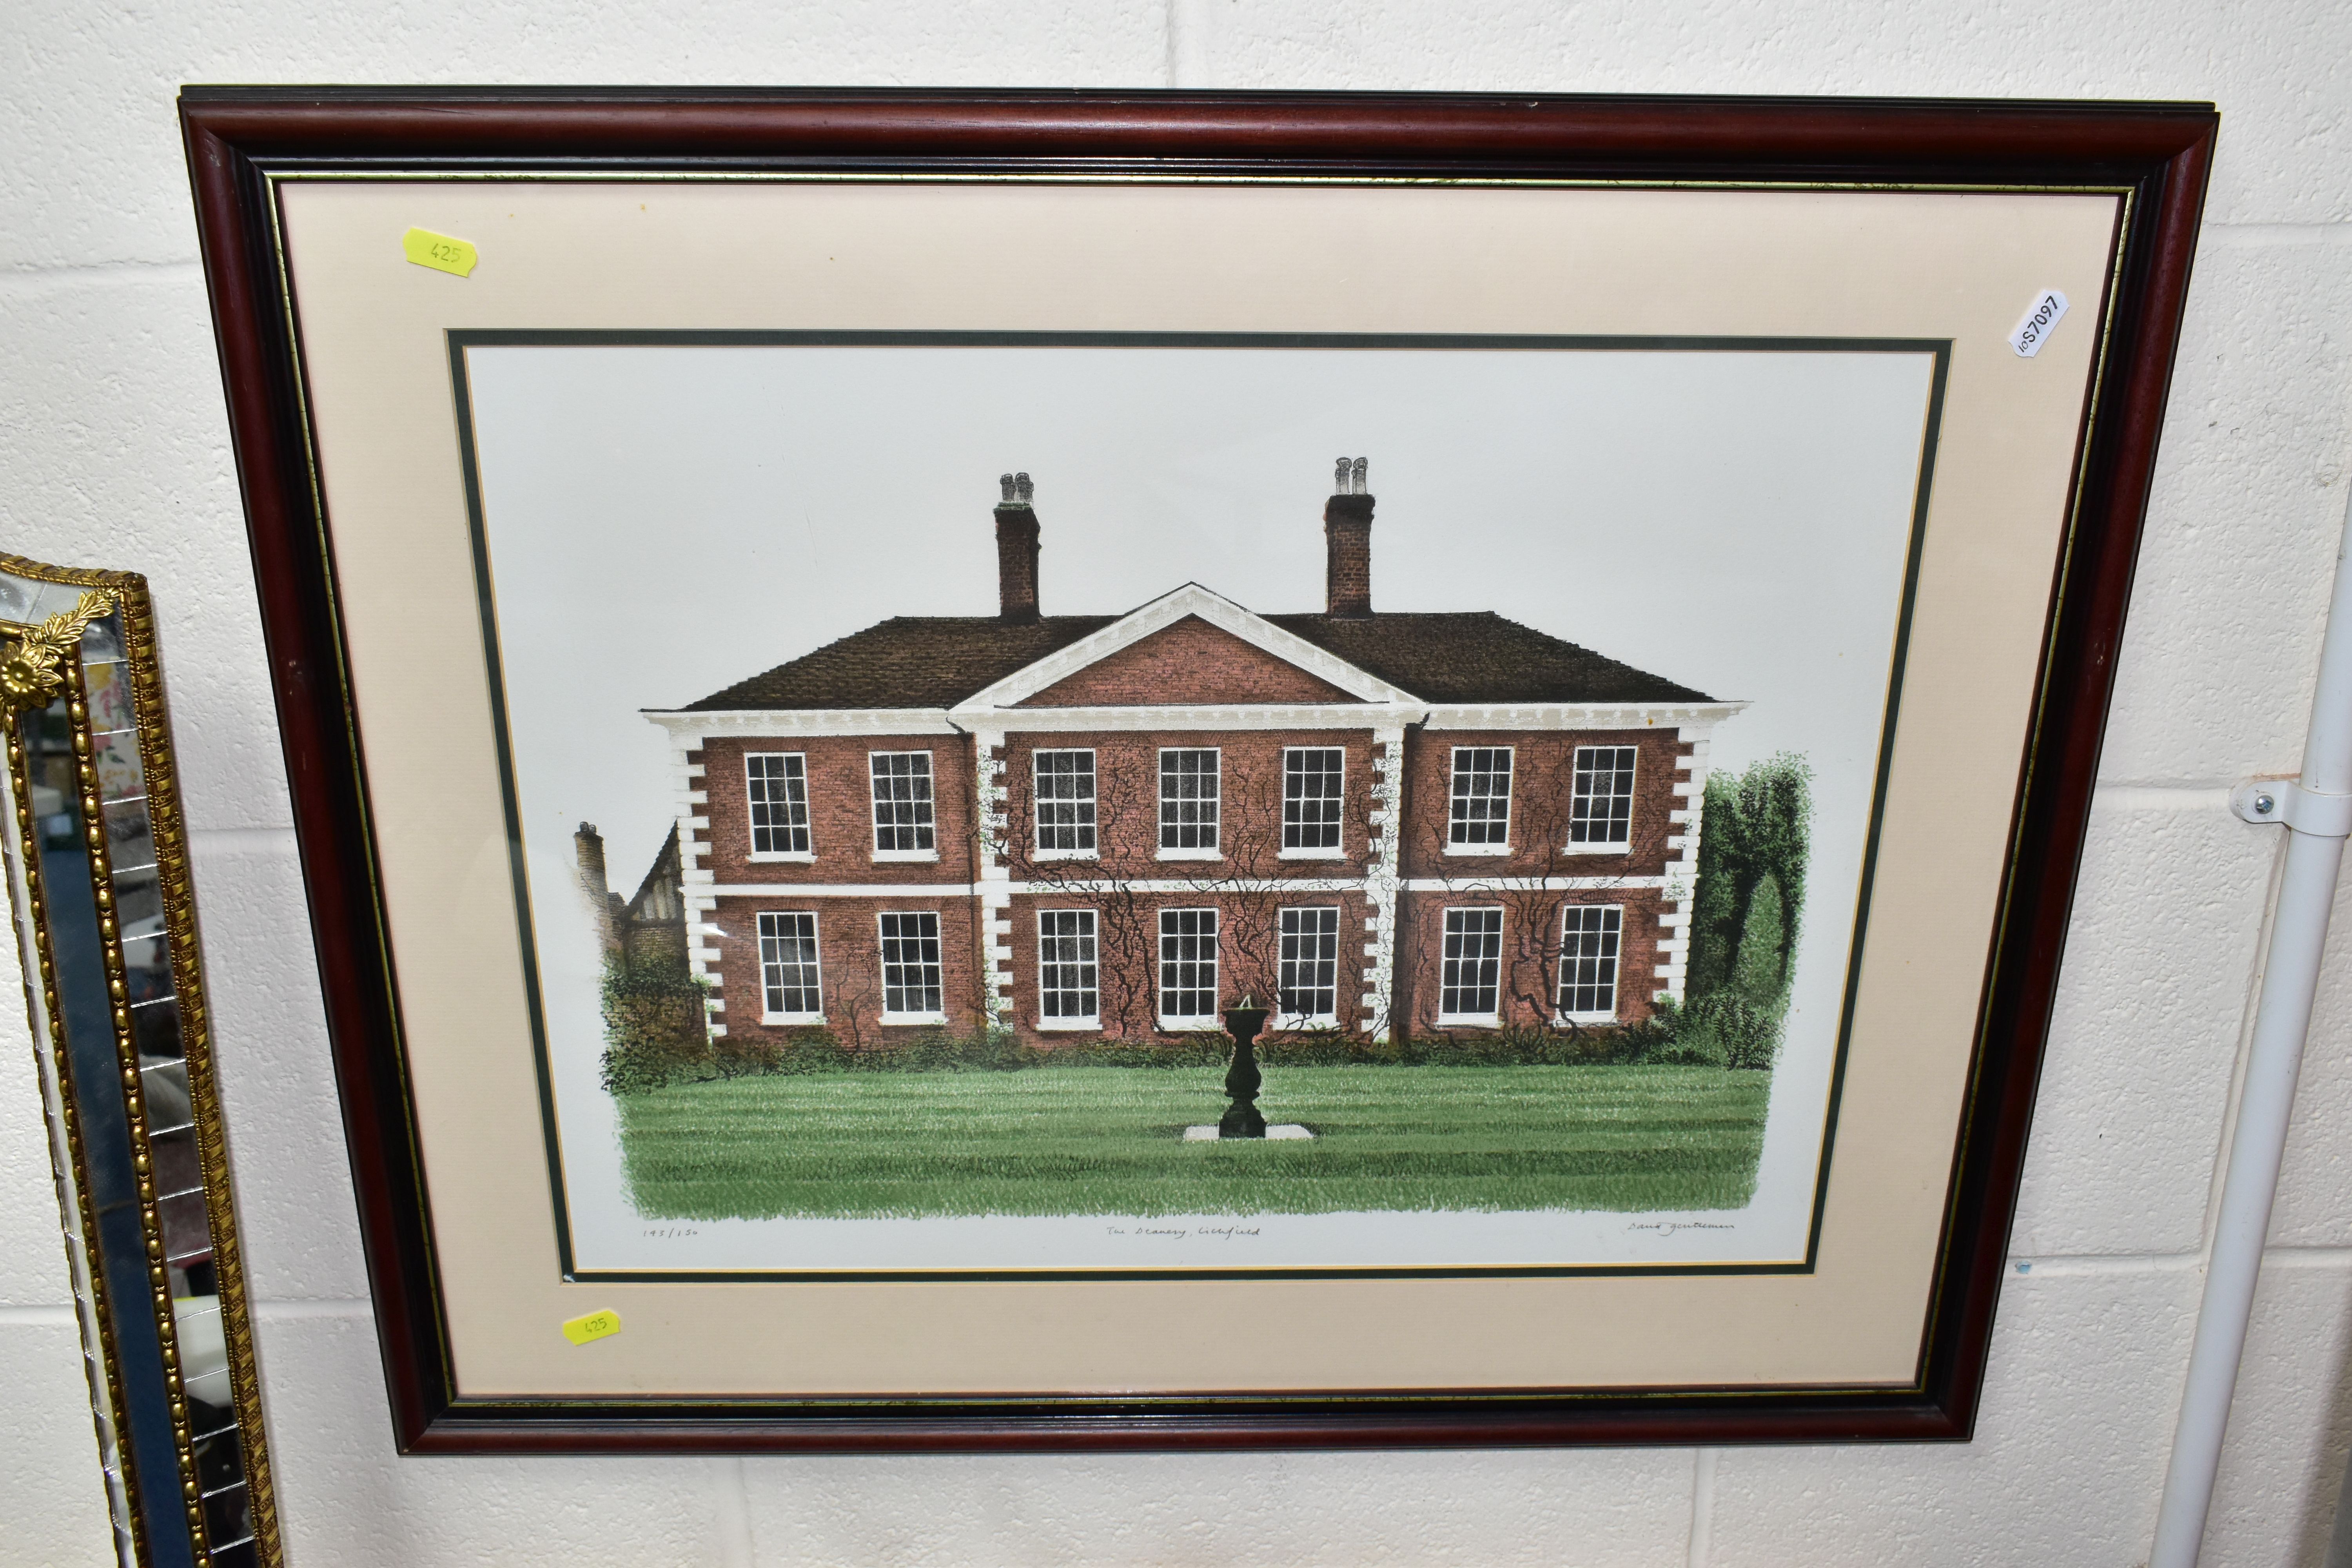 TWO LIMITED EDITION PRINTS BY DAVID GENTLEMAN, 'The Palace, Lichfield' pencil signed 143/150 - Image 3 of 4